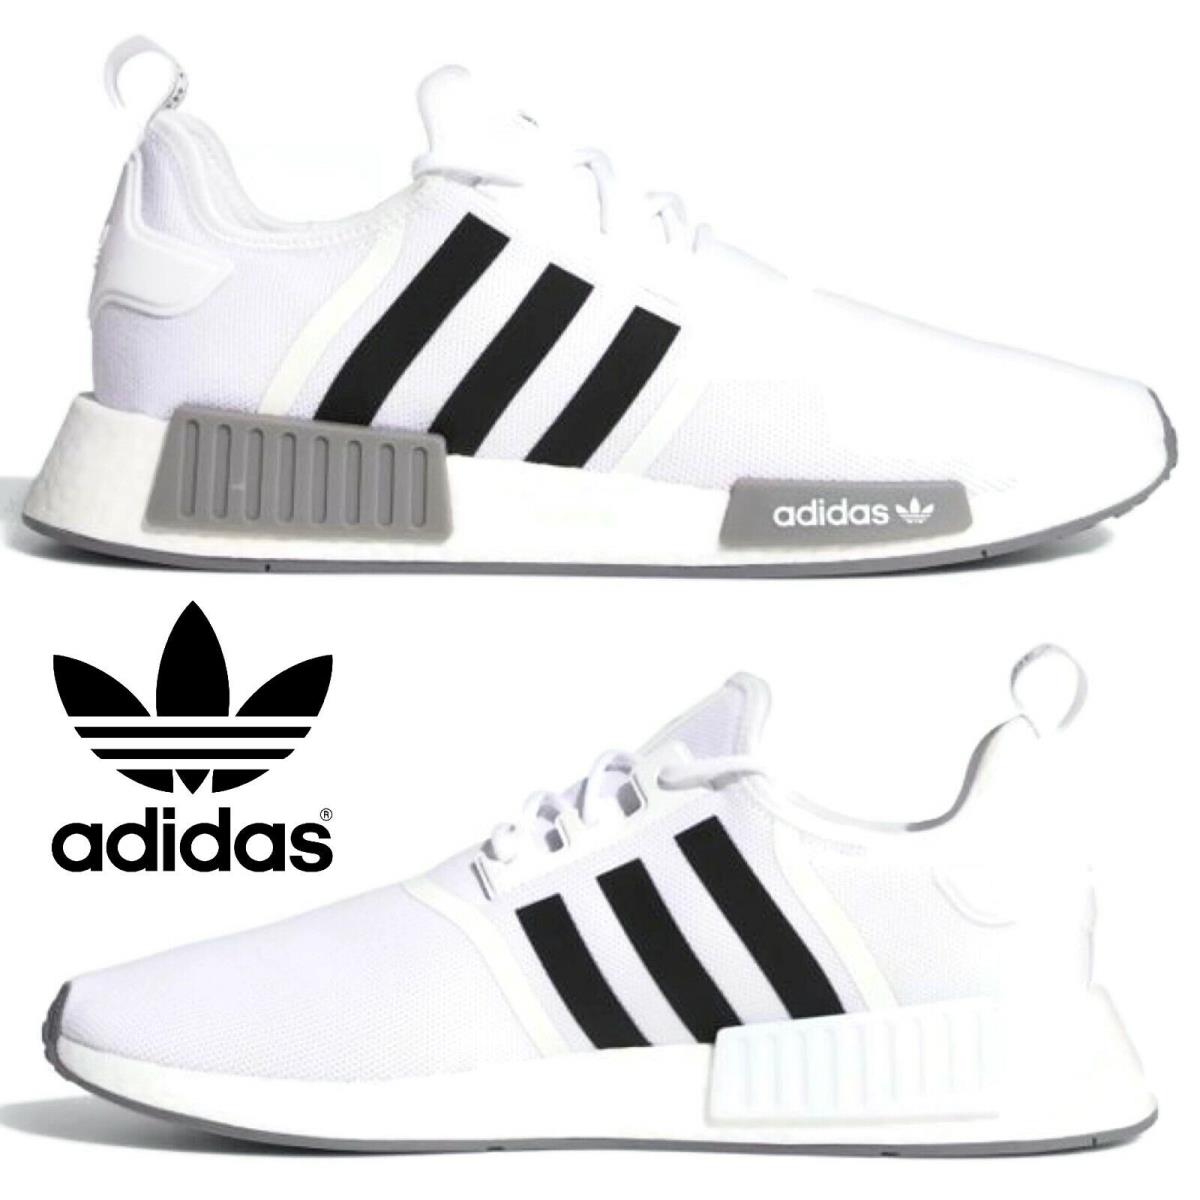 Adidas Originals Nmd R1 Primeblue Men`s Sneakers Running Shoes Casual Sport - White , Cloud White / Core Black / Grey Three Manufacturer